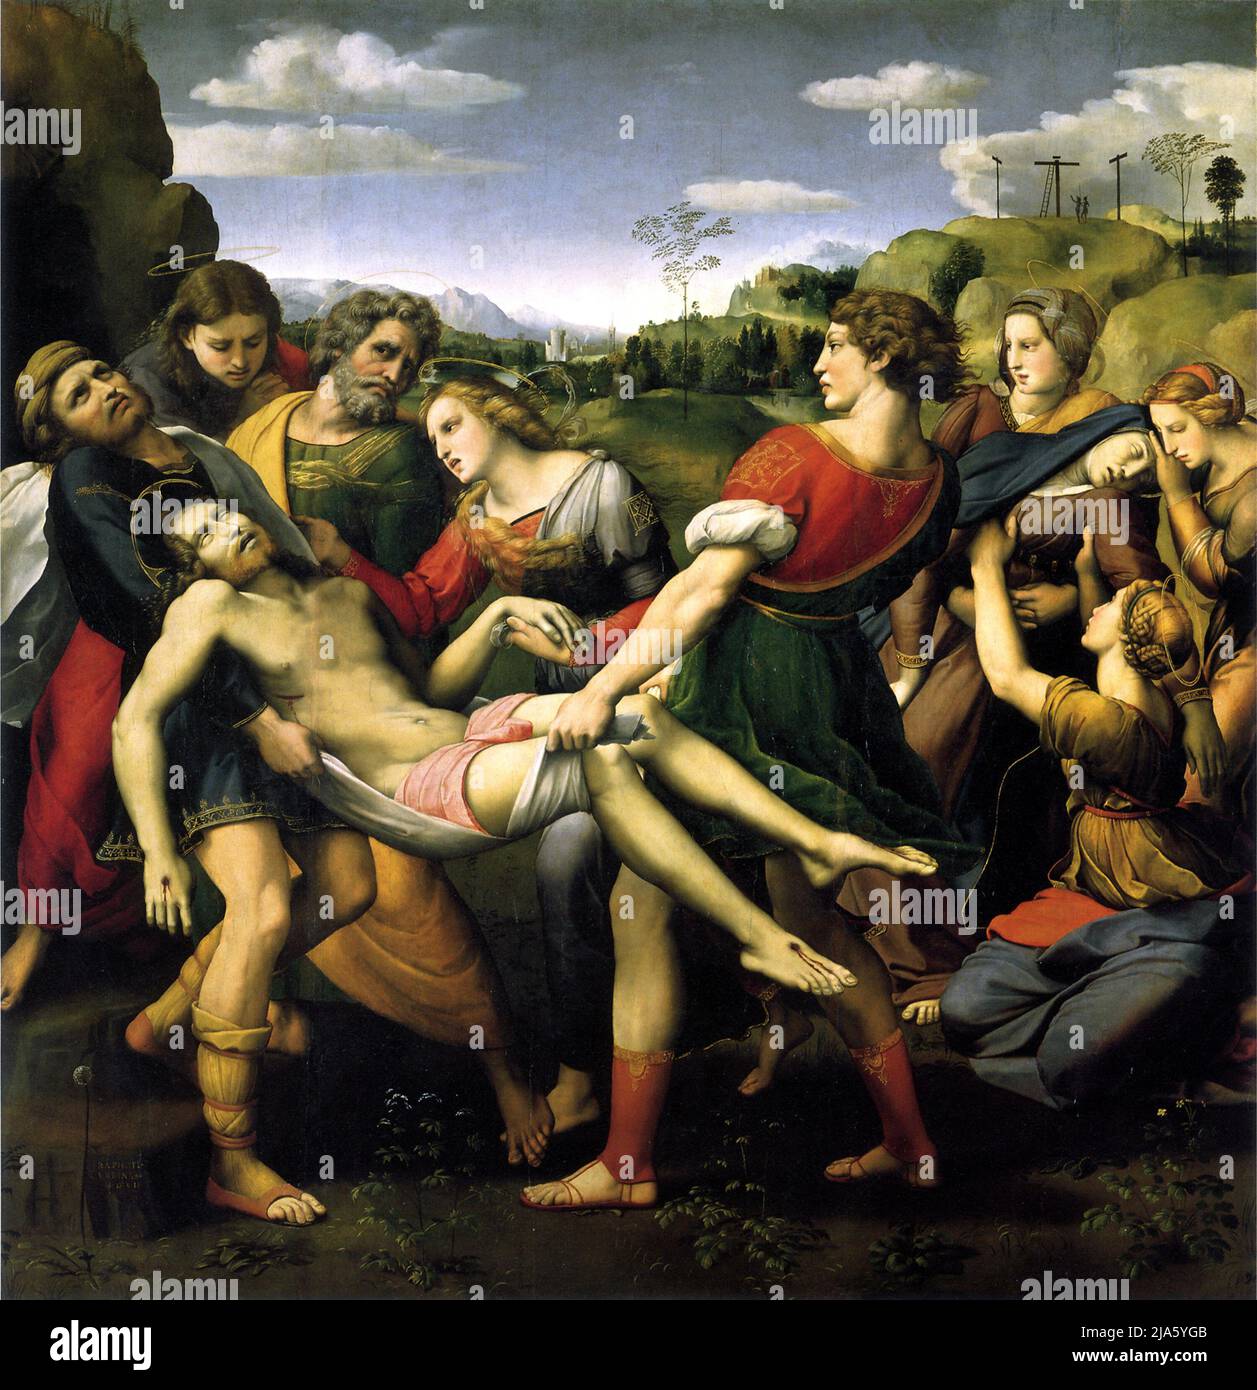 The Deposition by Raphael, showing a distressed, reddish-blond-haired Mary Magdalene dressed in fine clothes clutching the hand of Jesus's body as he is carried to the tomb. Stock Photo